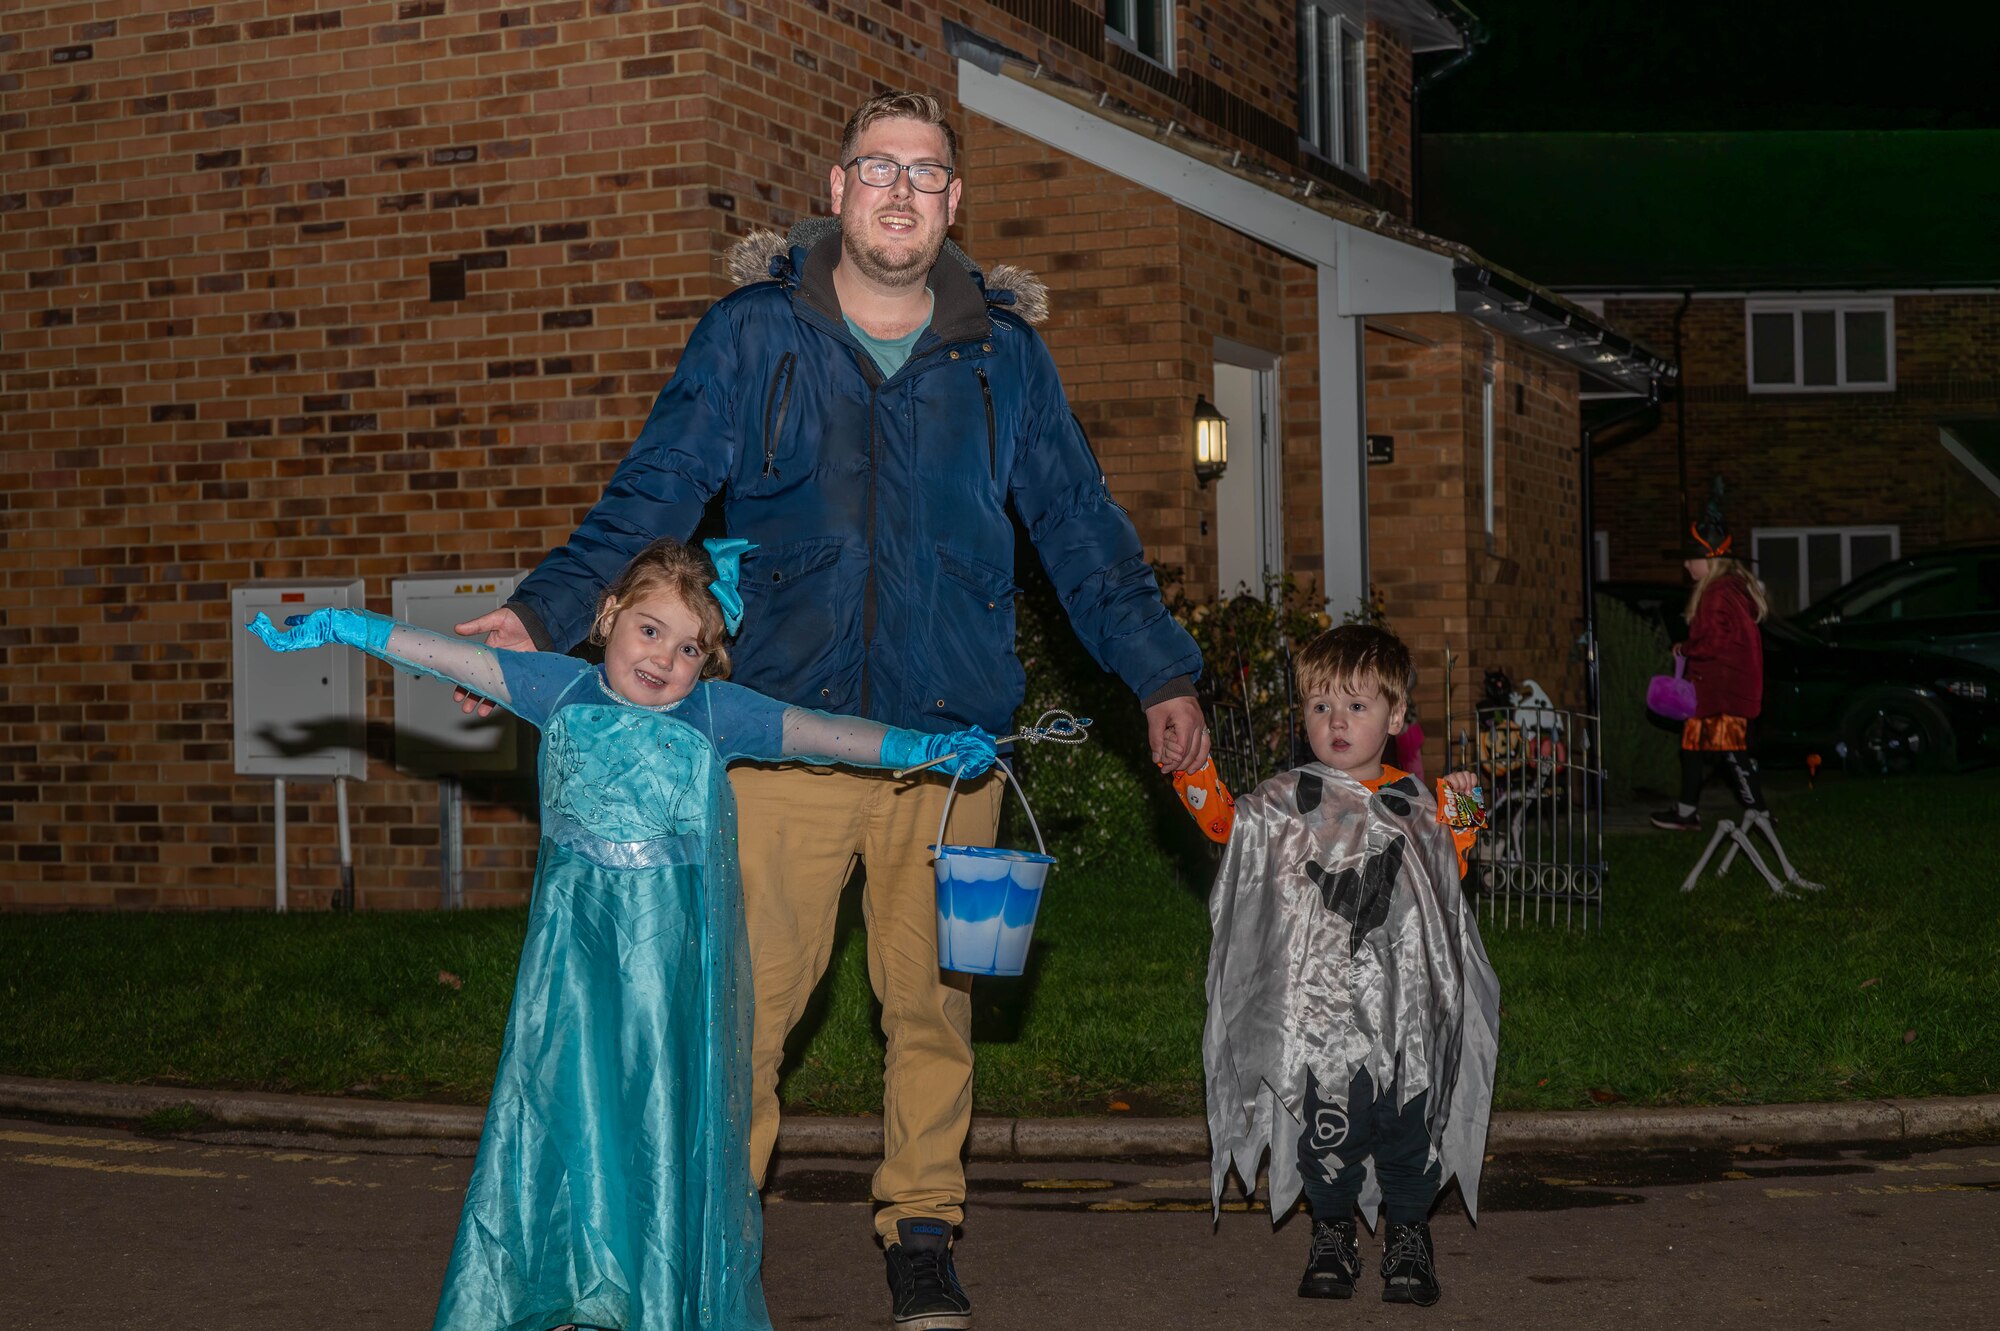 Trick or treaters pose for a photo